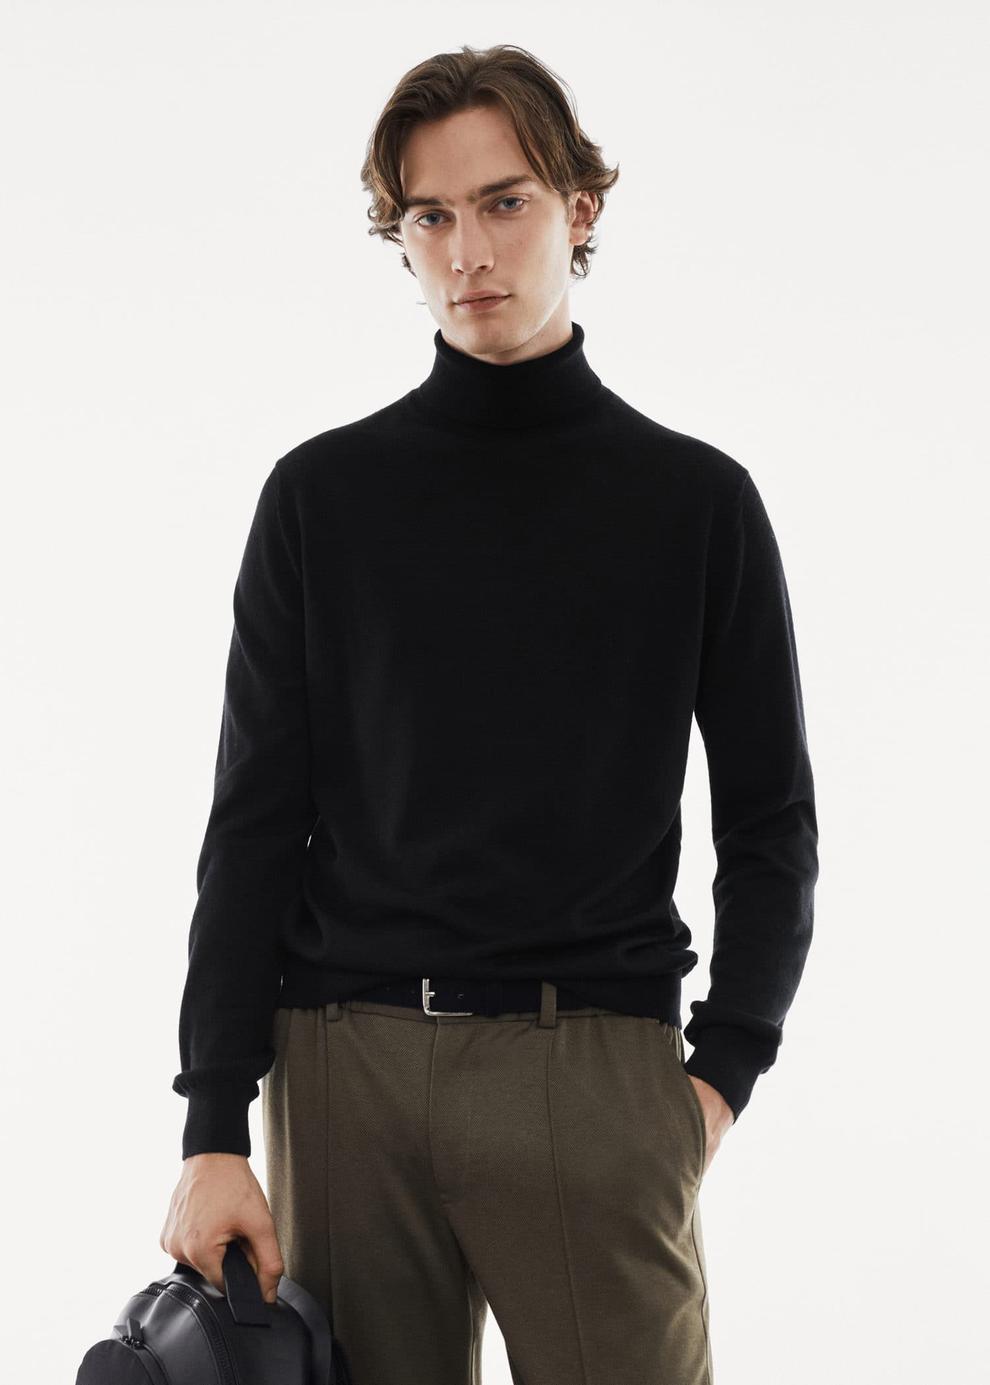 100% merino wool turtleneck sweater offers at S$ 89.9 in HE by Mango